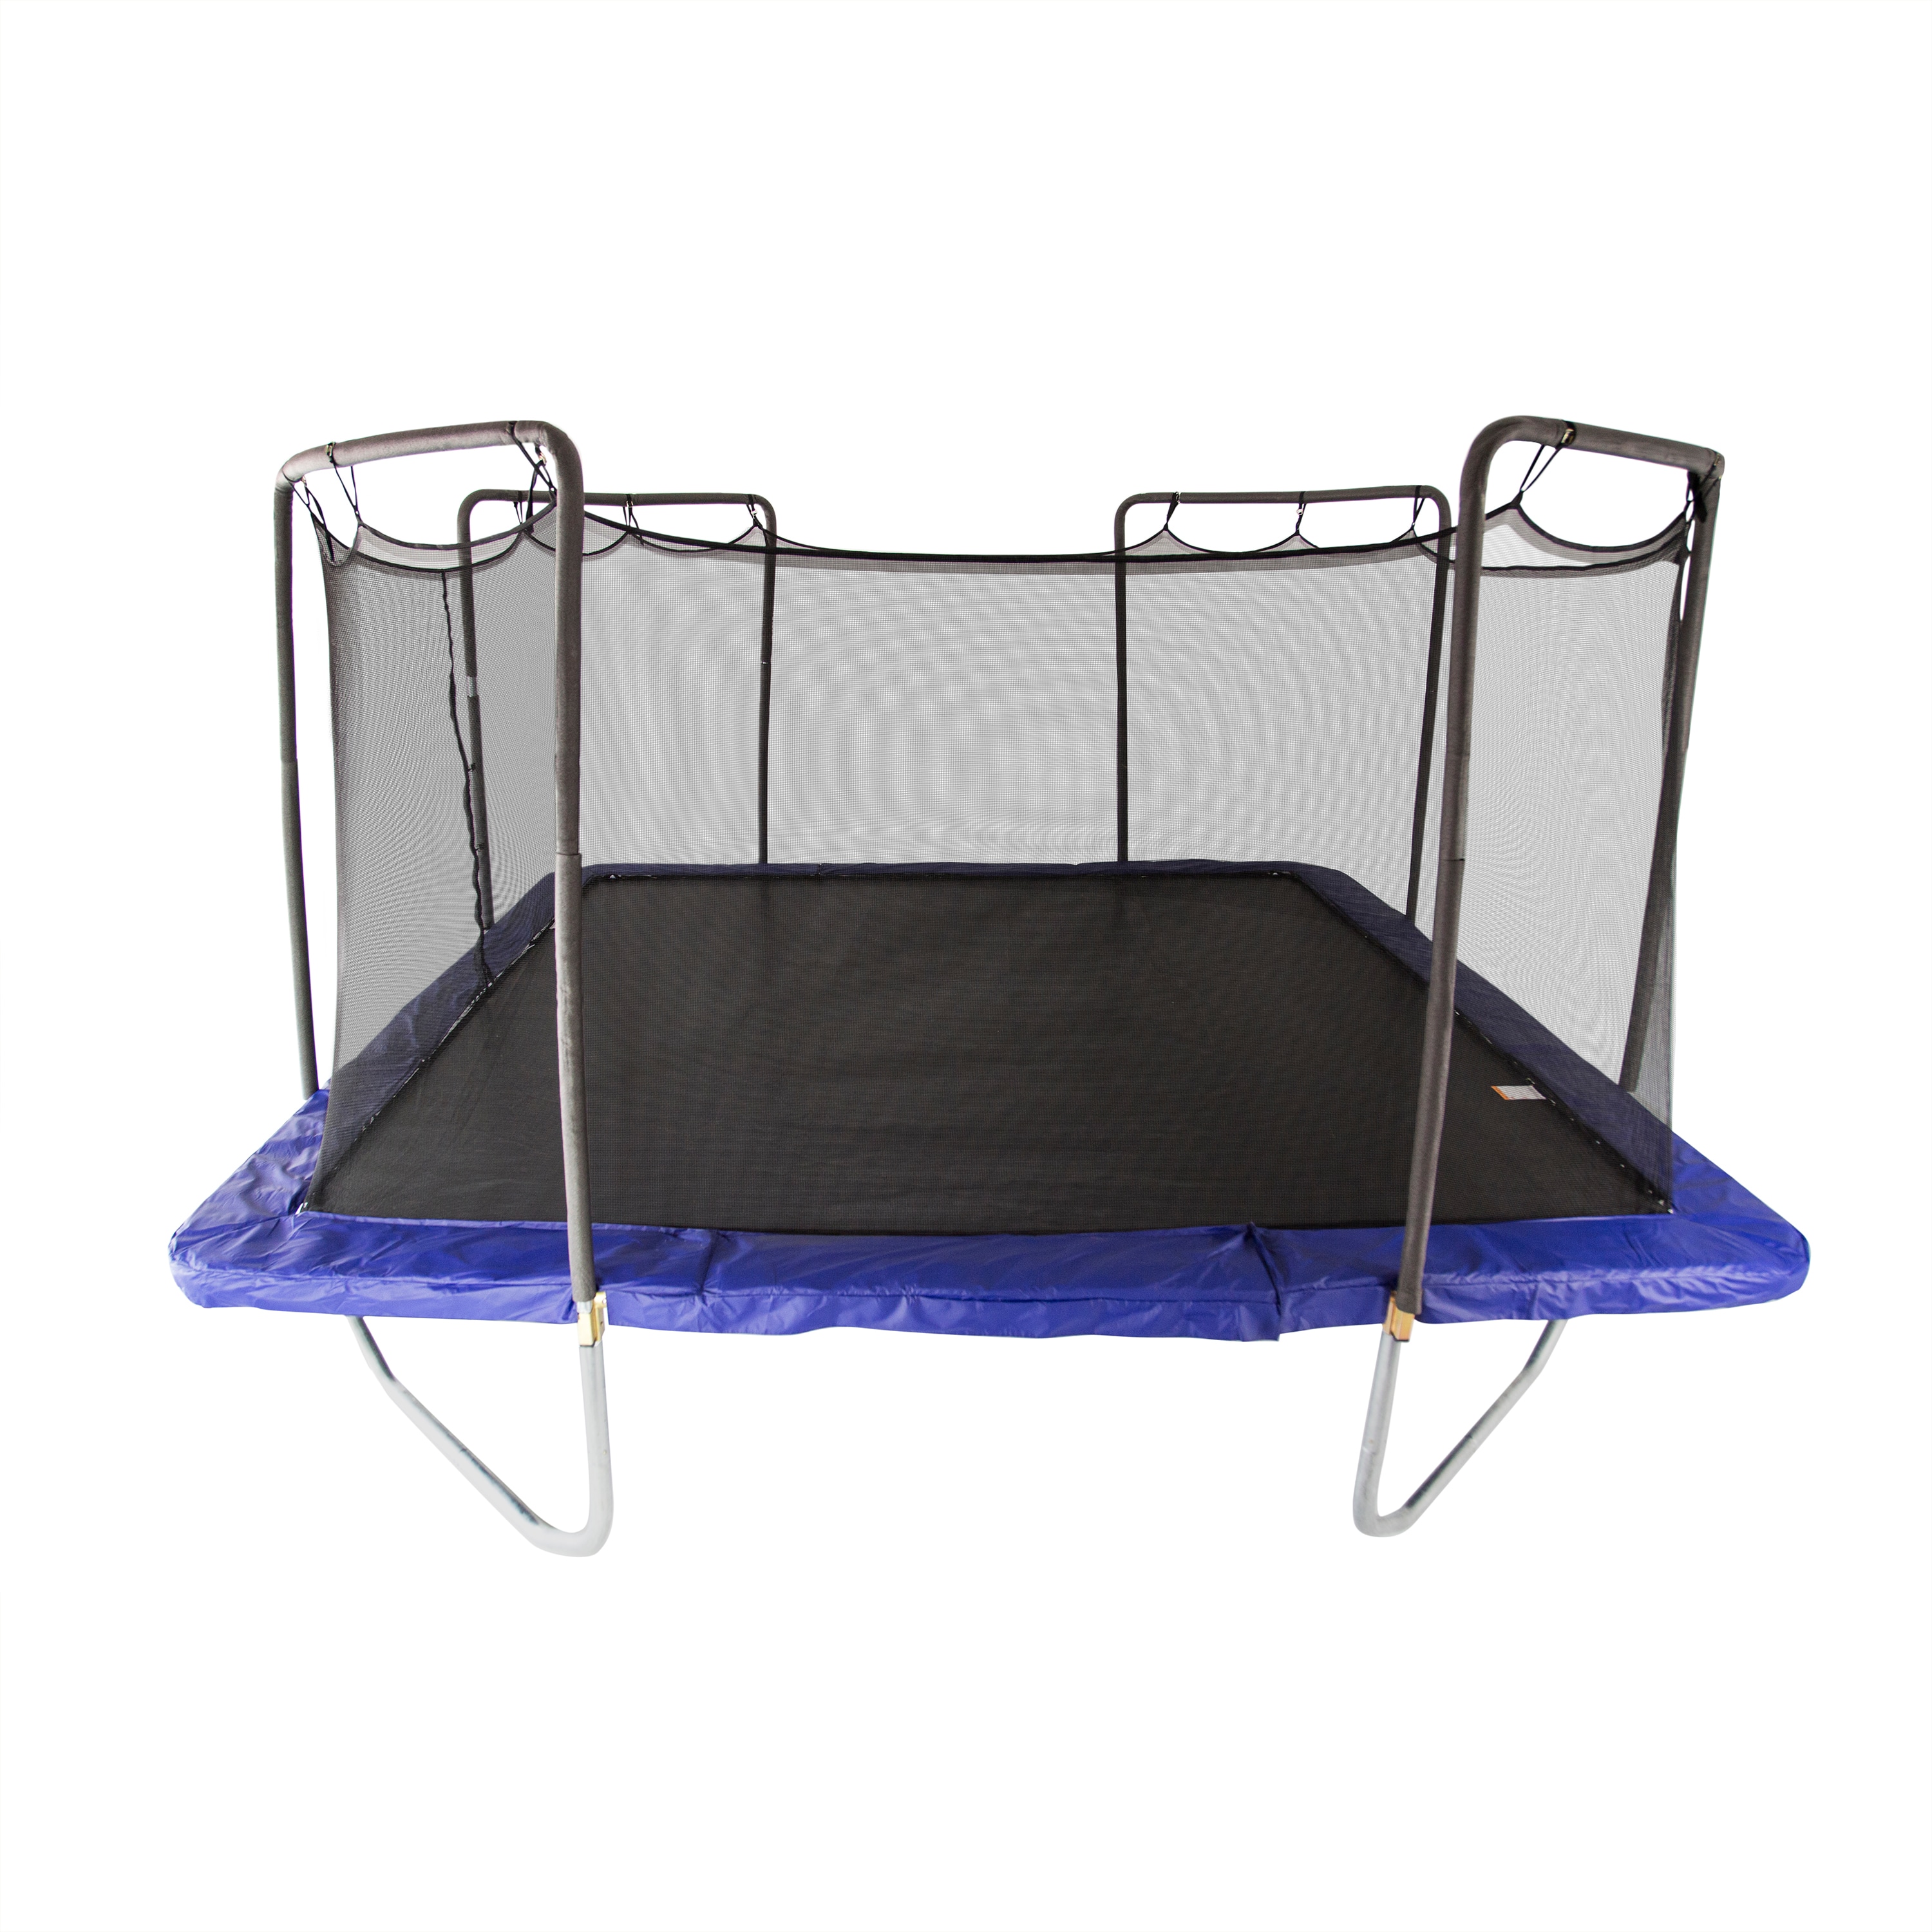 Skywalker Trampolines 15ft Square Trampoline with Enclosure - Blue | Outdoor Recreational Trampoline with UV Protection and No-Gap Enclosure System -  SWTCS015